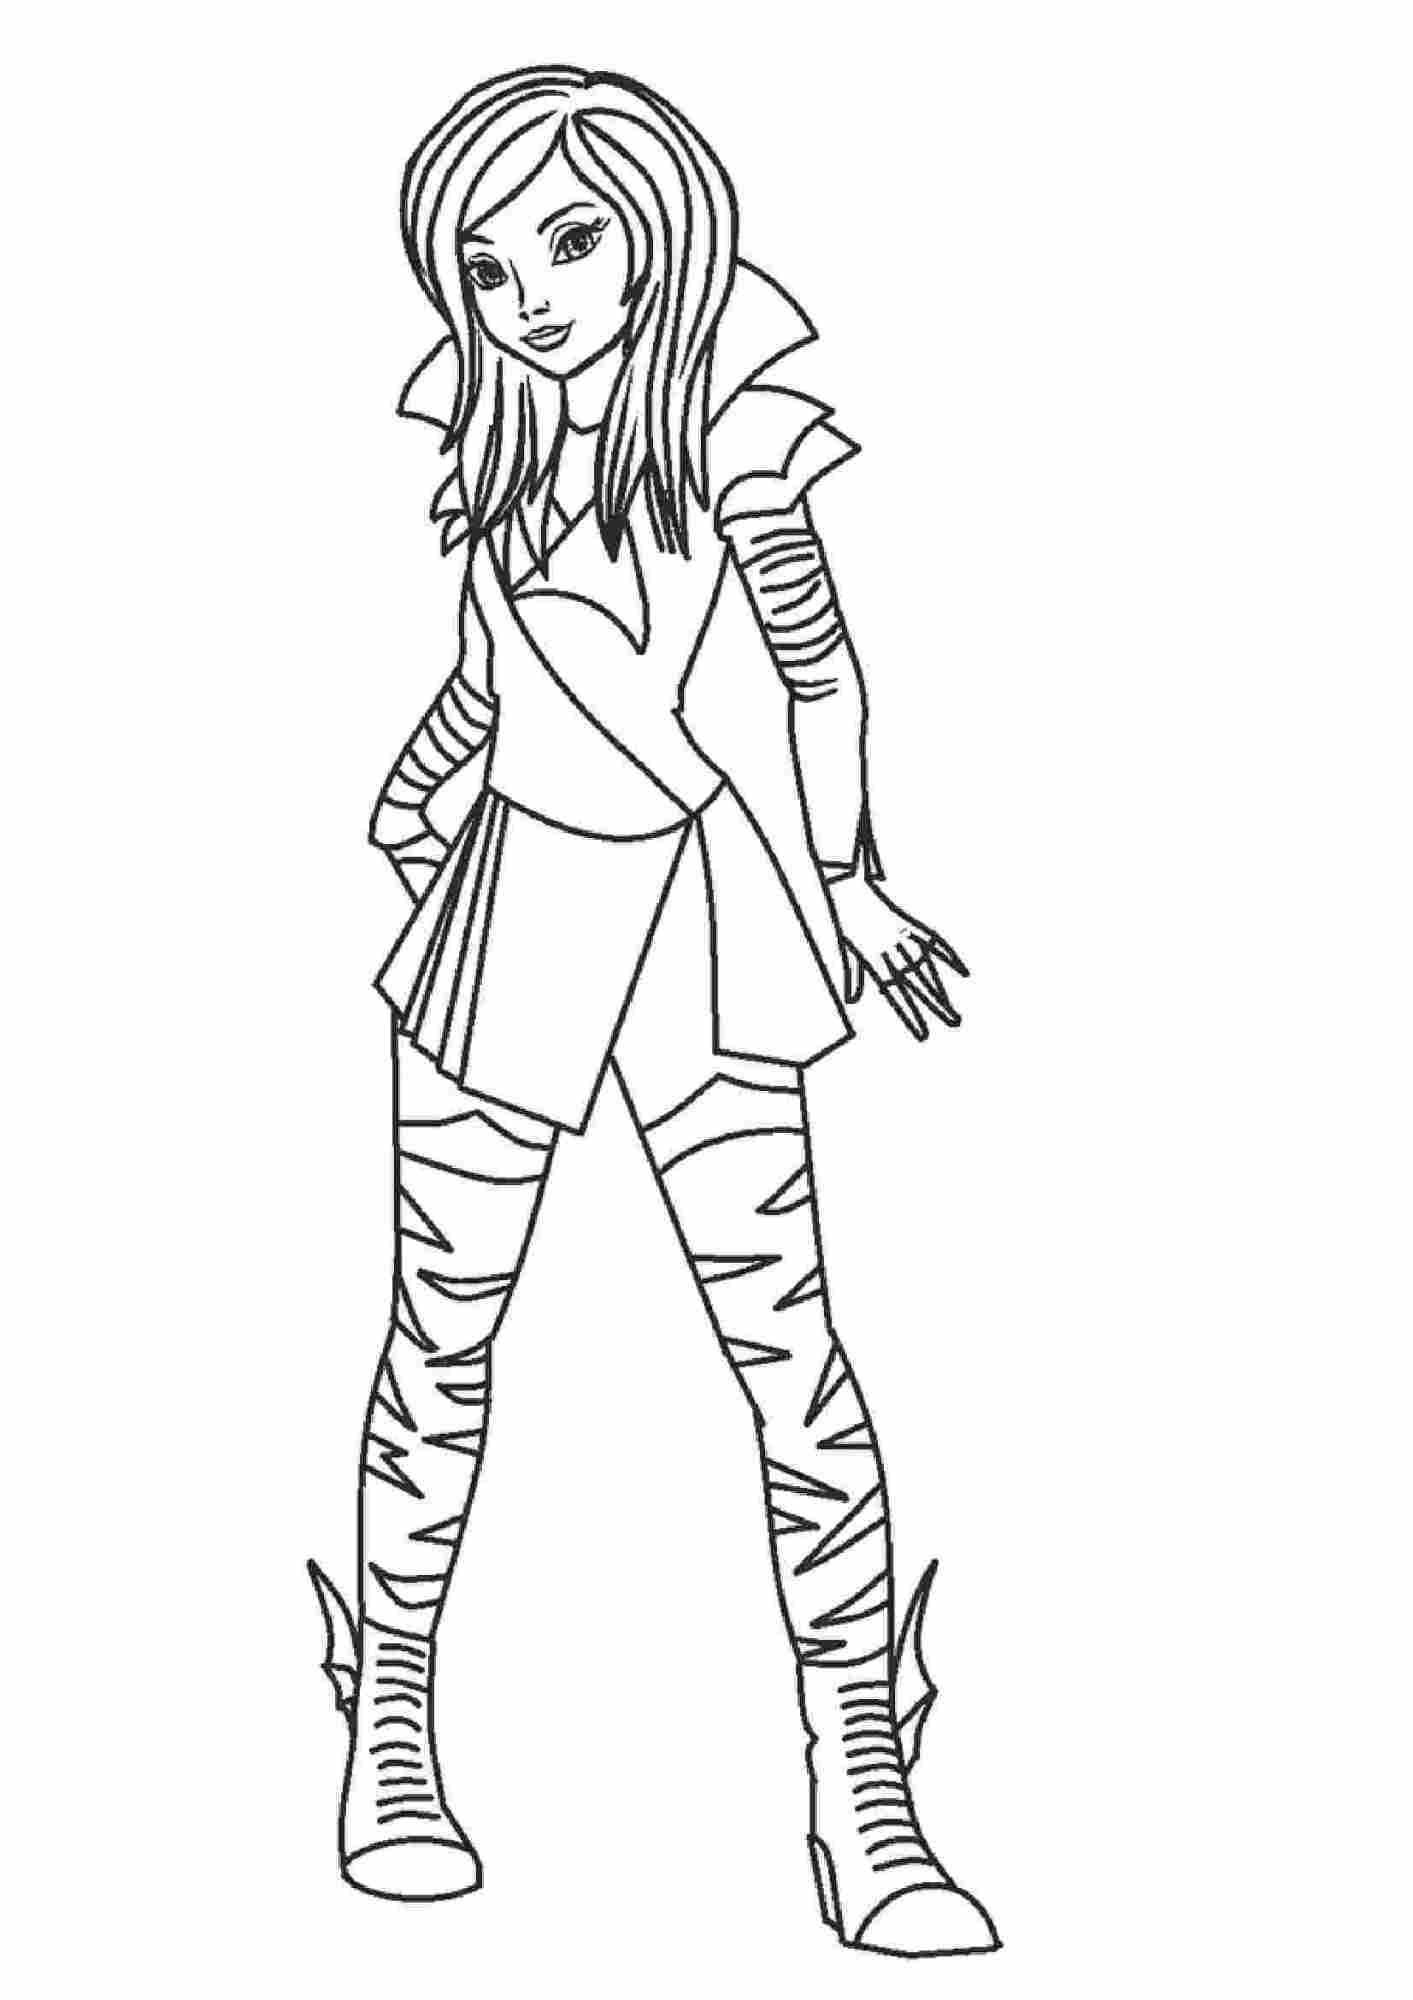 Mal in Descendants wants to be like her pure evil mother Coloring Page